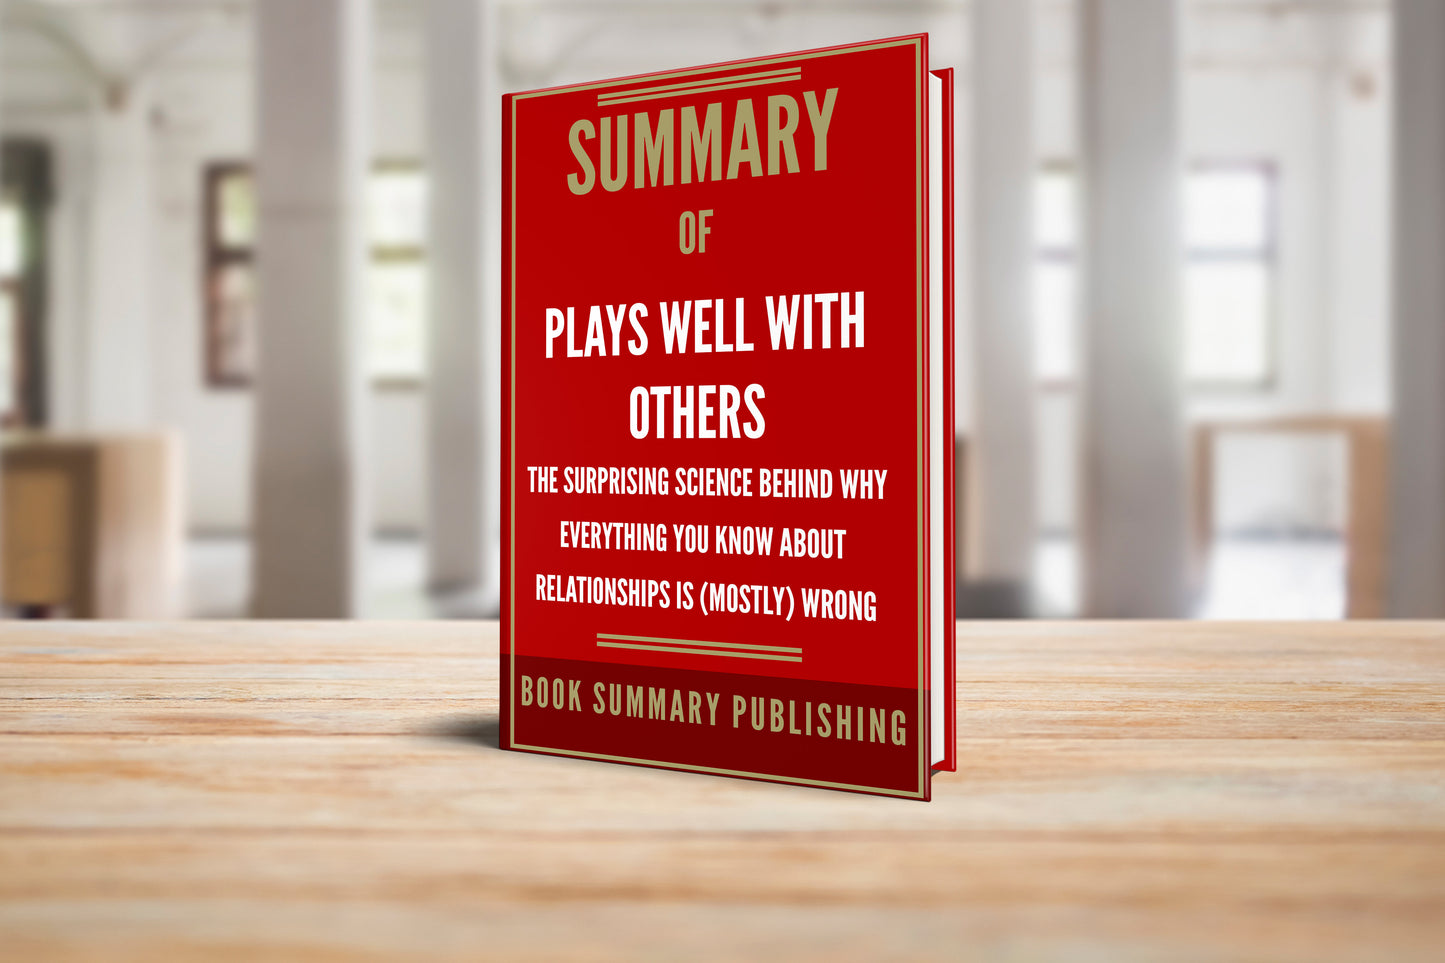 Summary of "Plays Well with Others: The Surprising Science behind why Everything You Know about Relationships is (Mostly) Wrong"